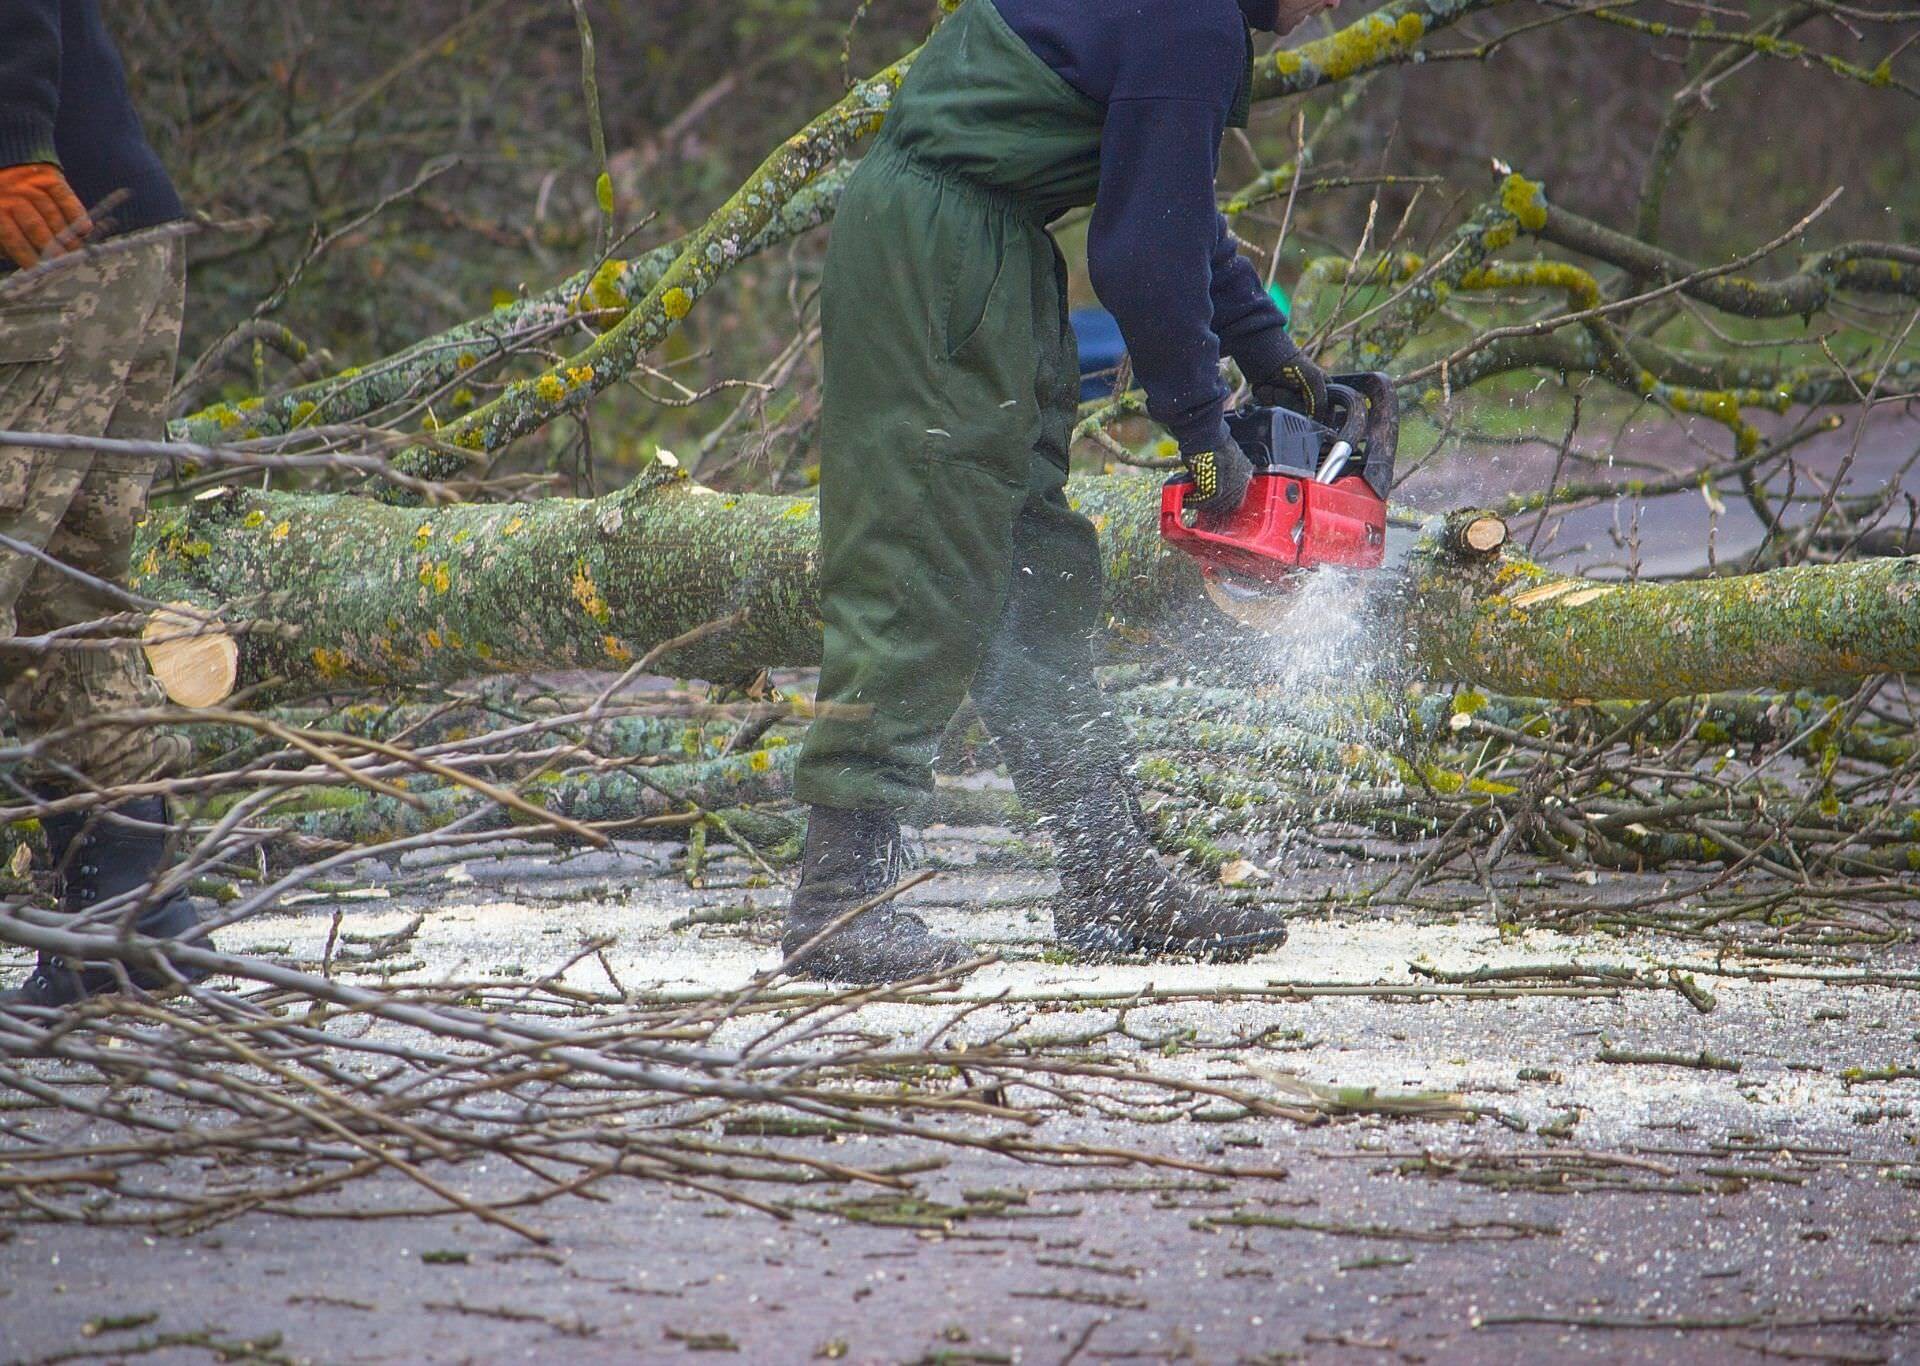 worker cutting a tree fallen in a road as part of an emergency tree service requested